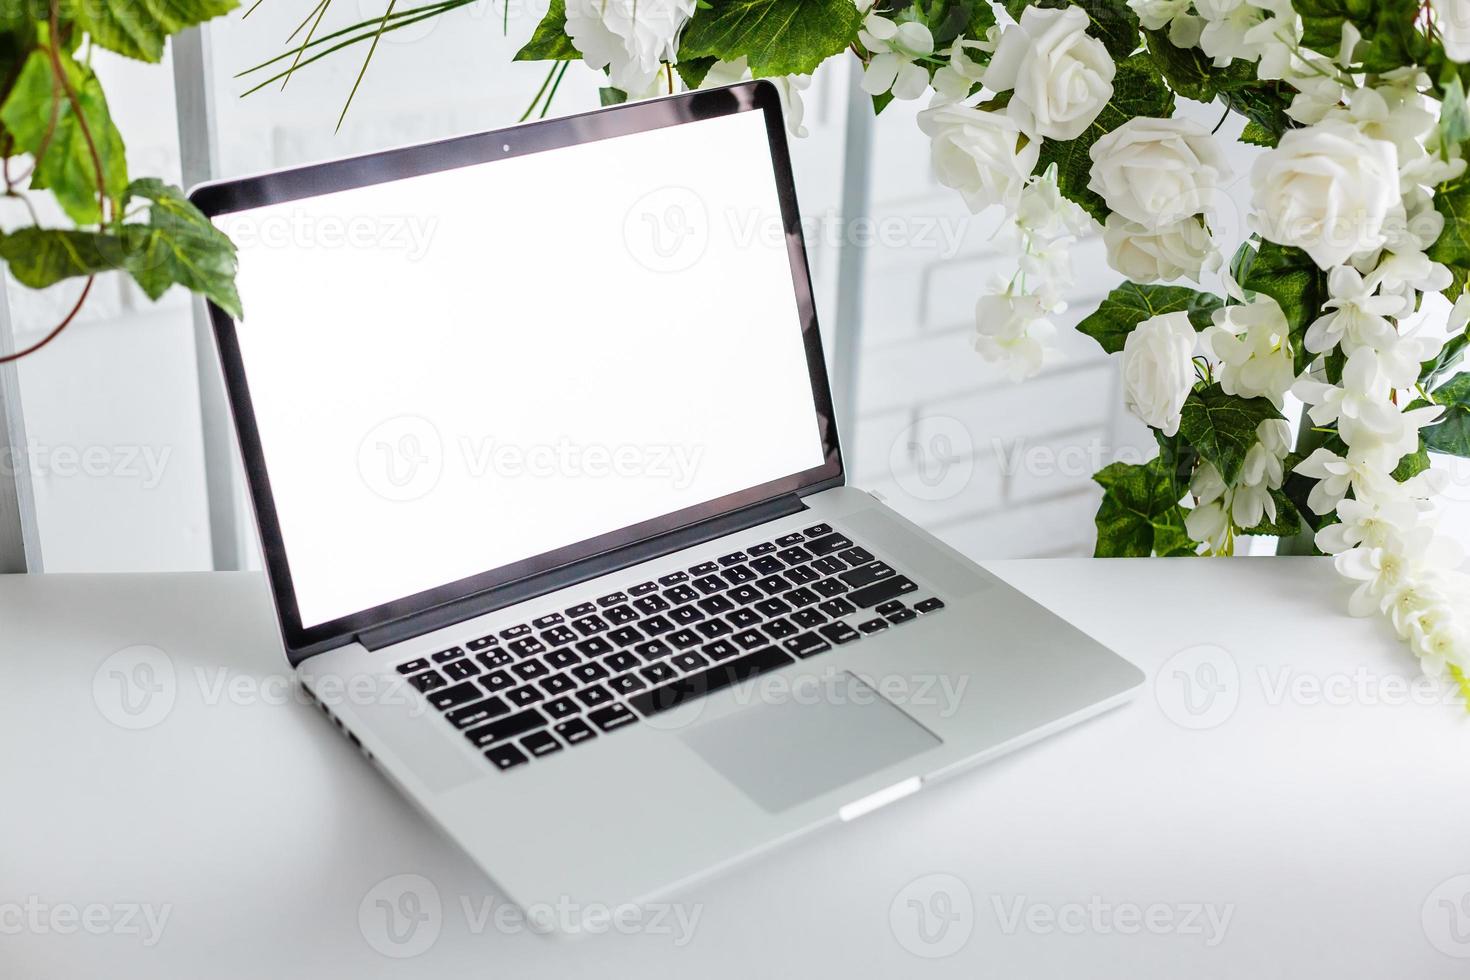 blank screen laptop, beautiful roses and eucalyptus bouquet, white vintage pastel background. Blog, website or social media concept photo